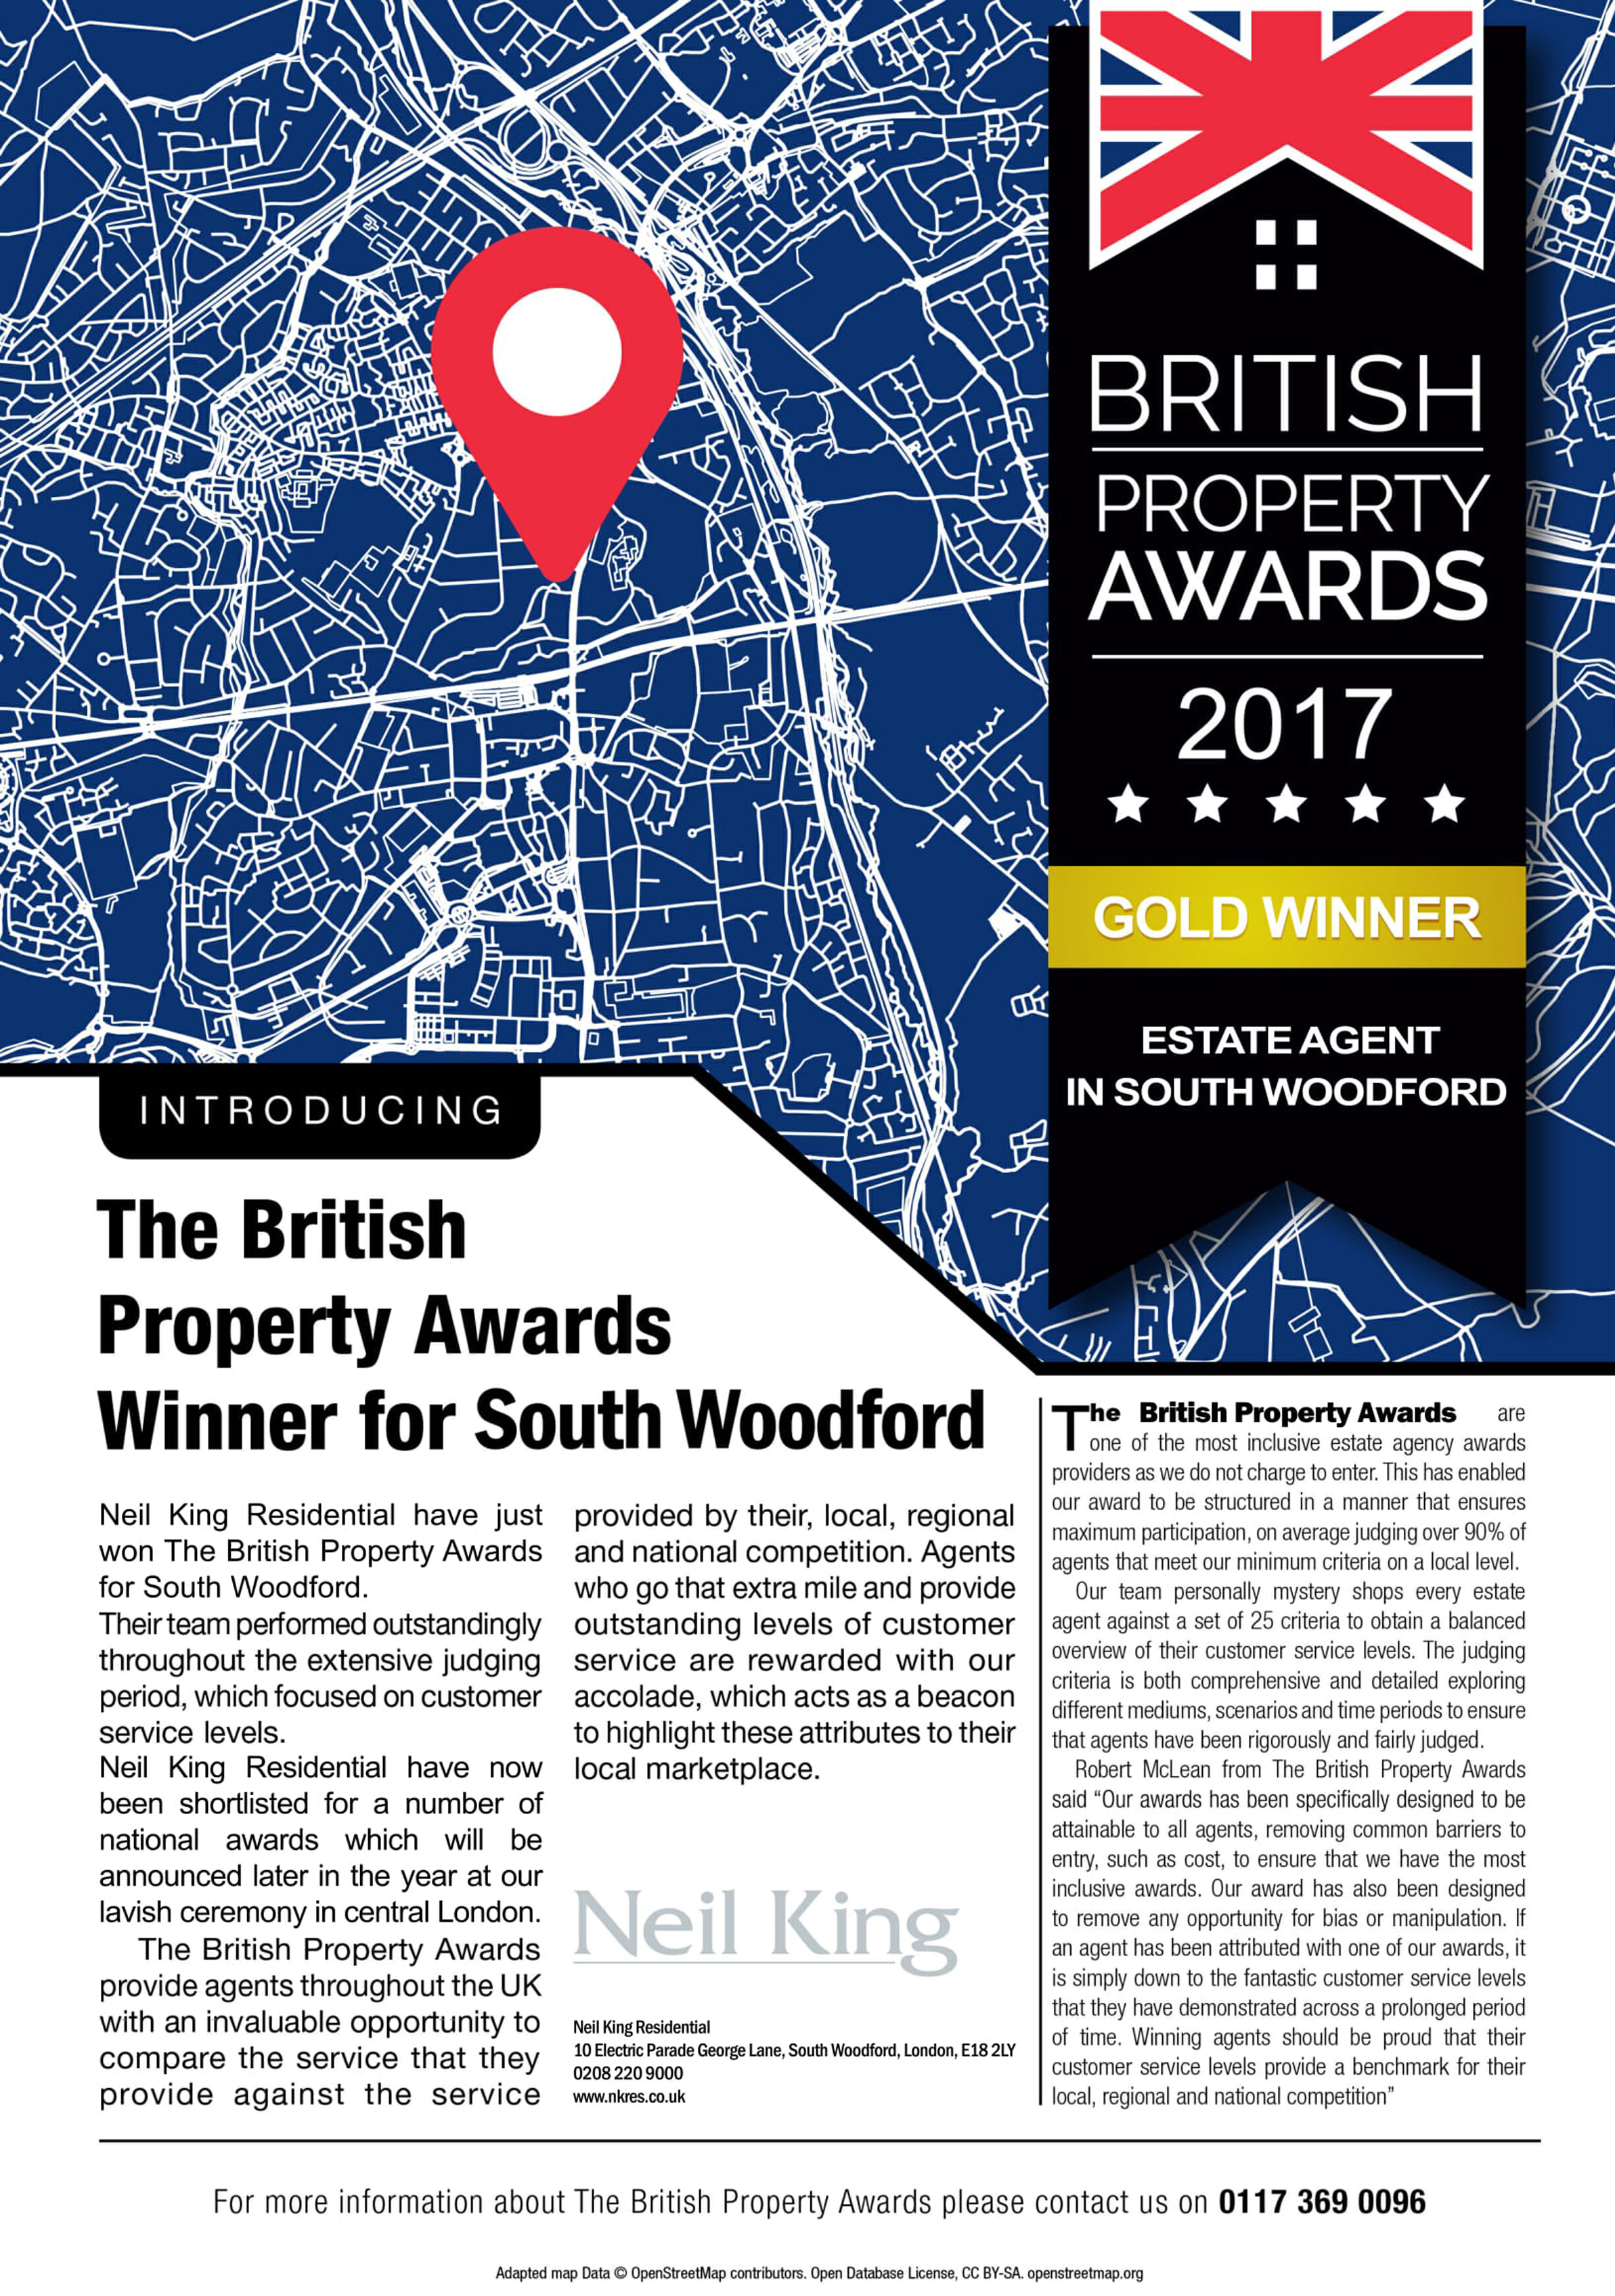 INTRODUCING THE BRITISH PROPERTY AWARDS WINNER FOR SOUTH WOODFORD